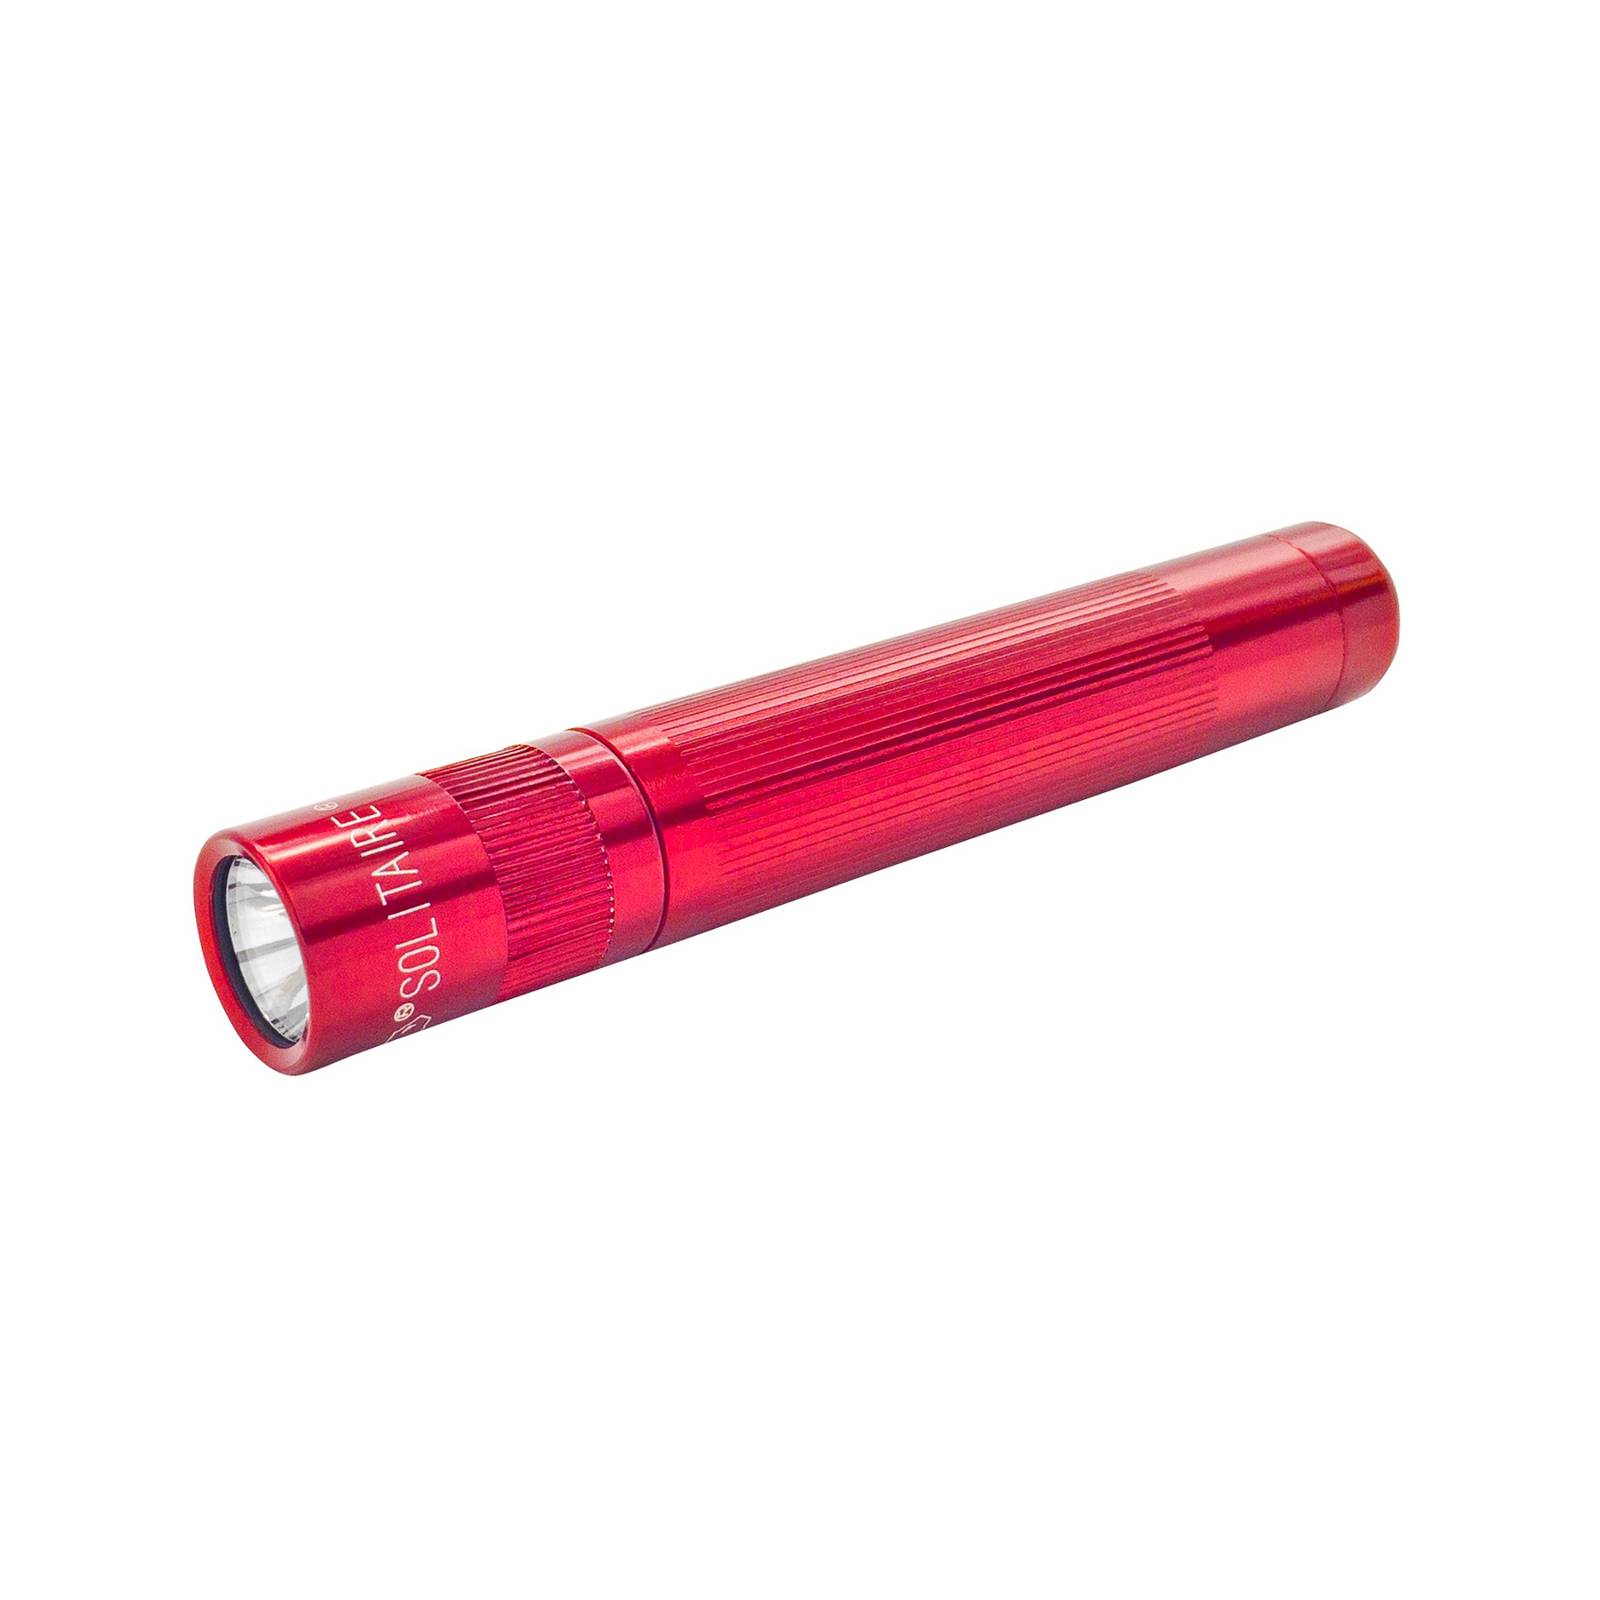 maglite lampe de poche led solitaire, 1-cell aaa, rouge